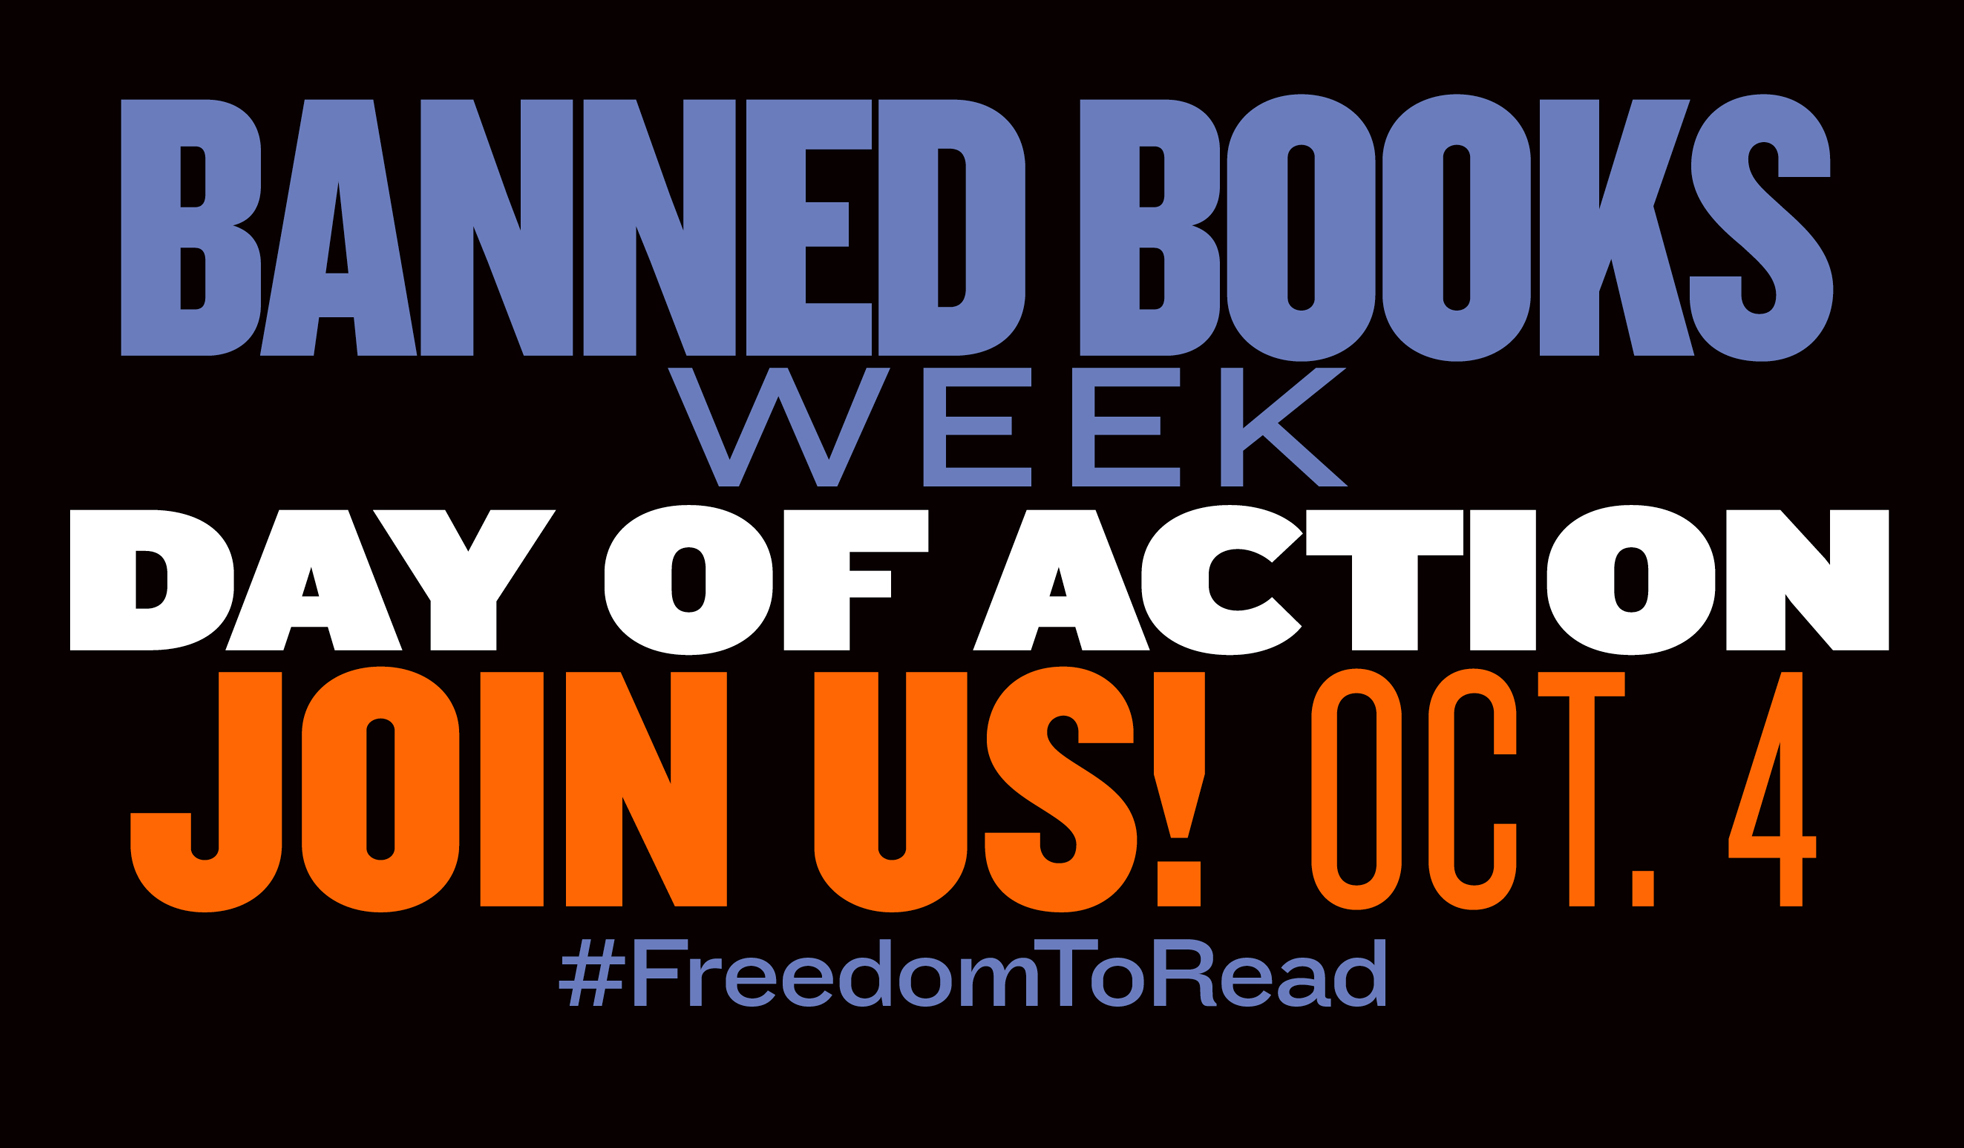 On October 4, New York City’s libraries invite you to join us on social media to protect the #FreedomToRead!